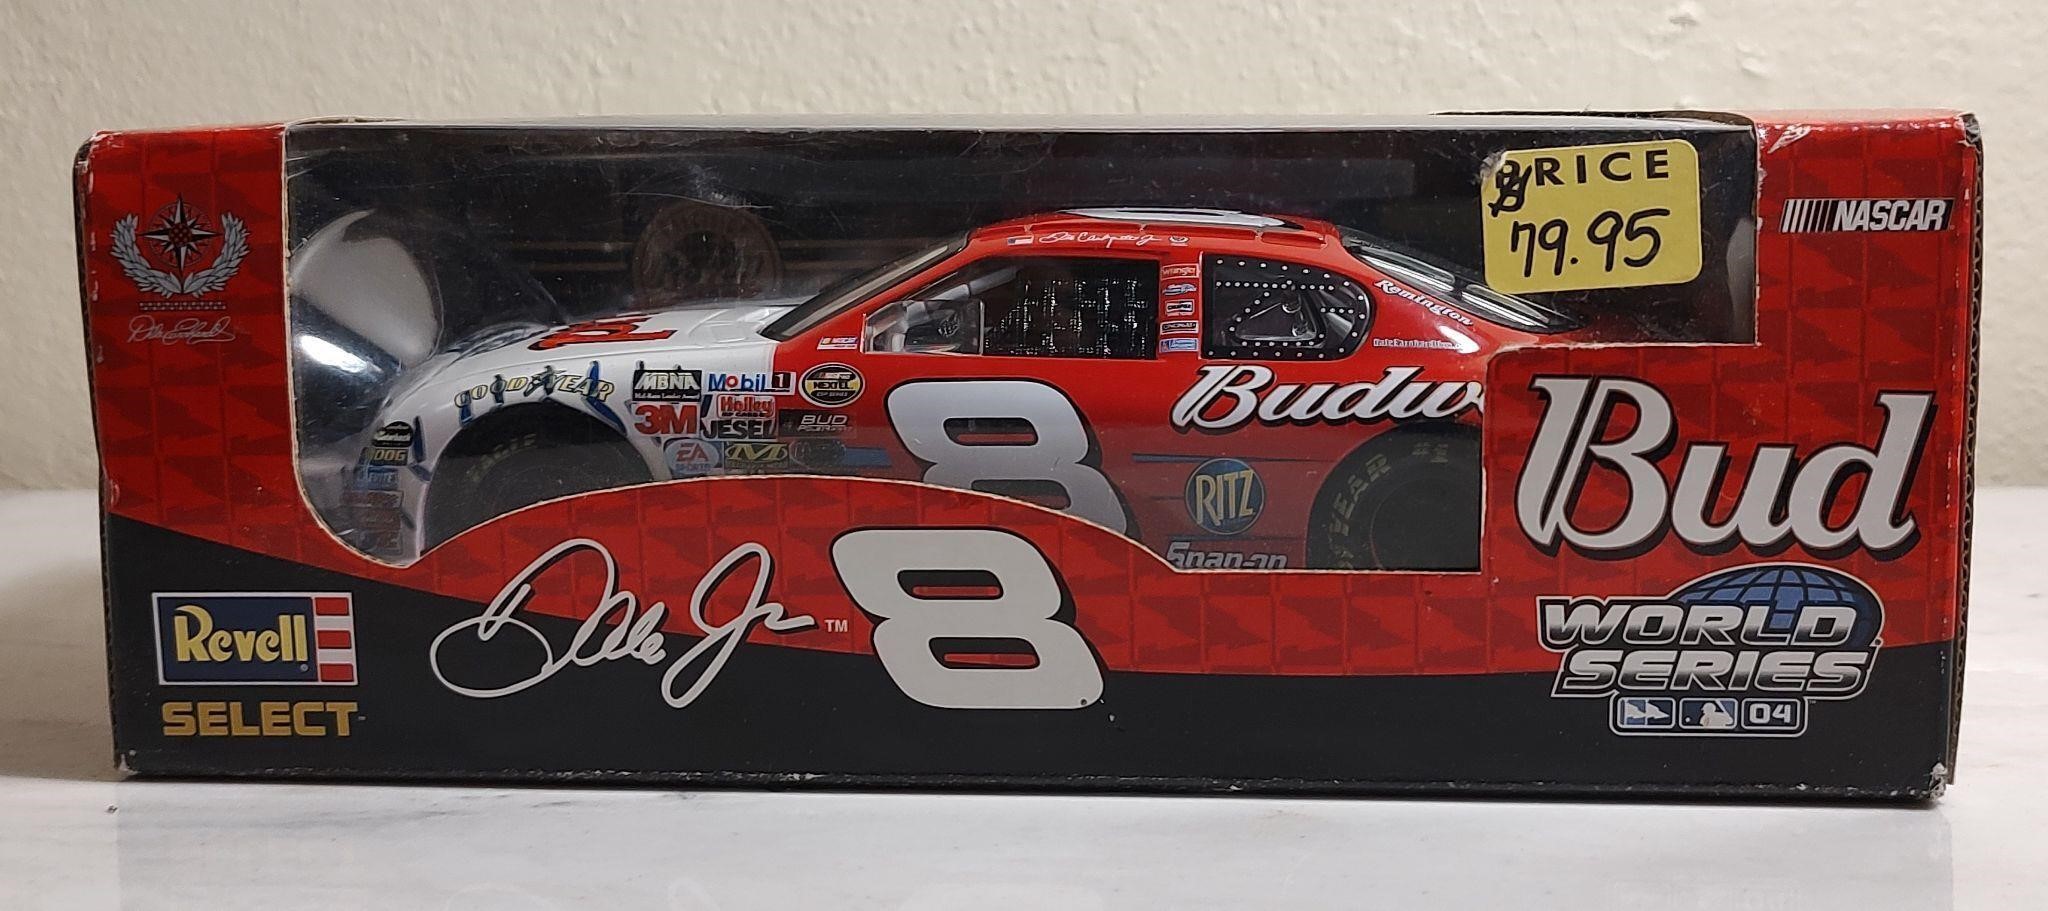 *New in Box* Dale Jr. Limited Edition Model